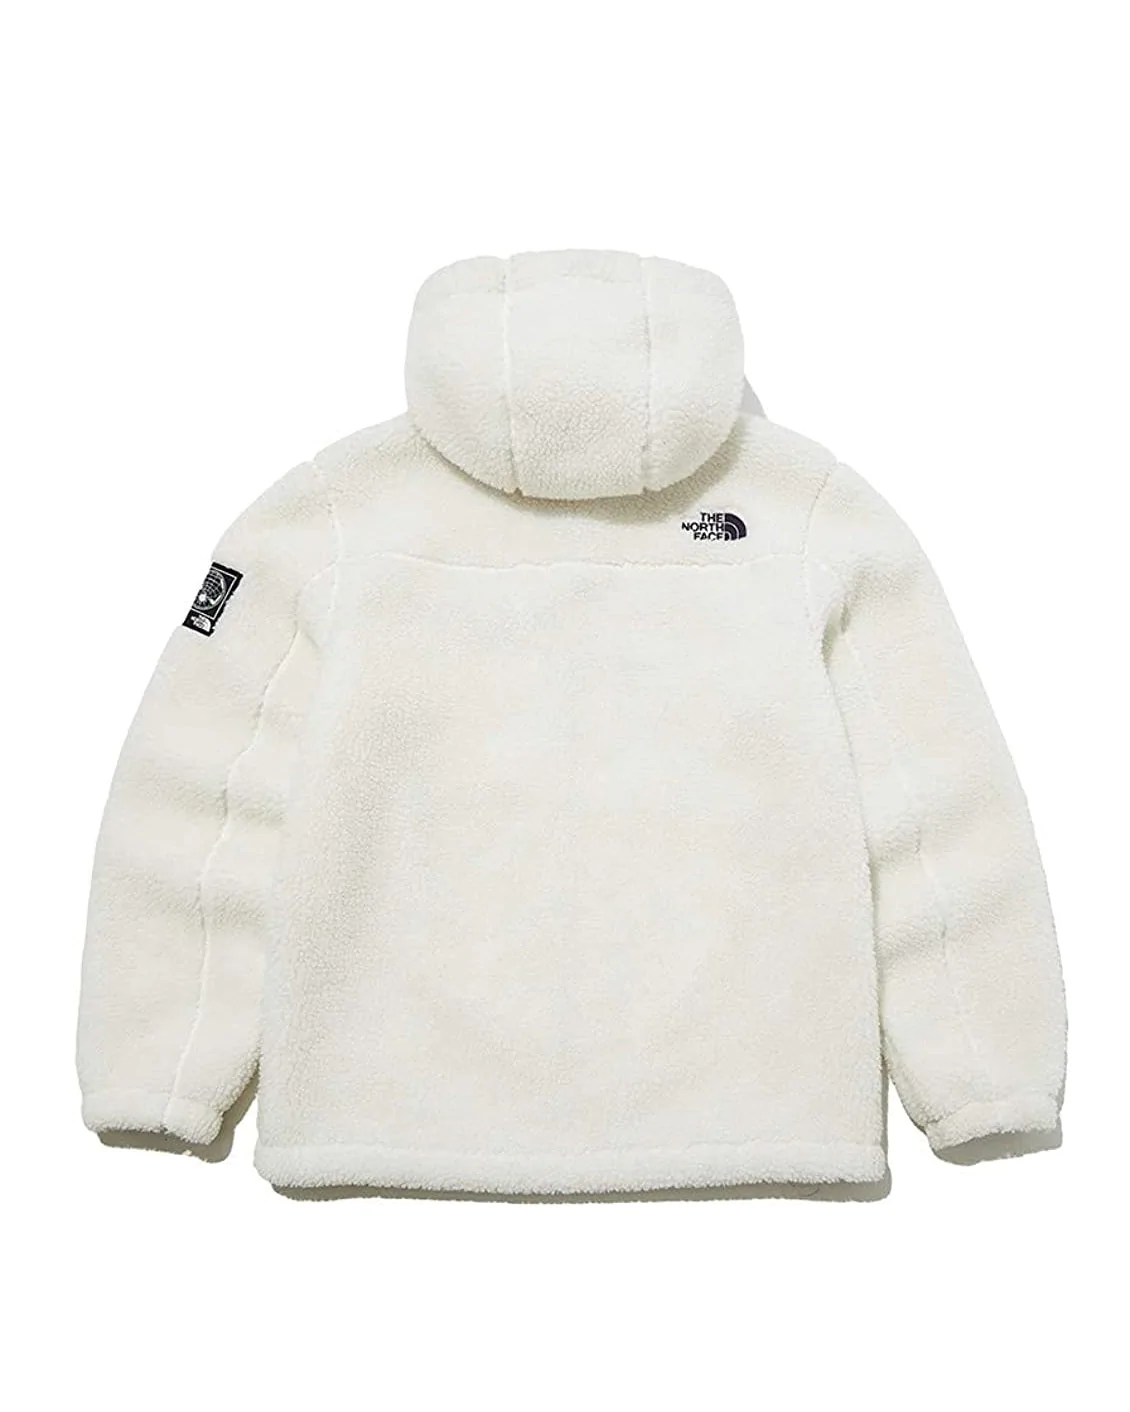 The North Face Kids "Save the Earth" Fleece Hoodie